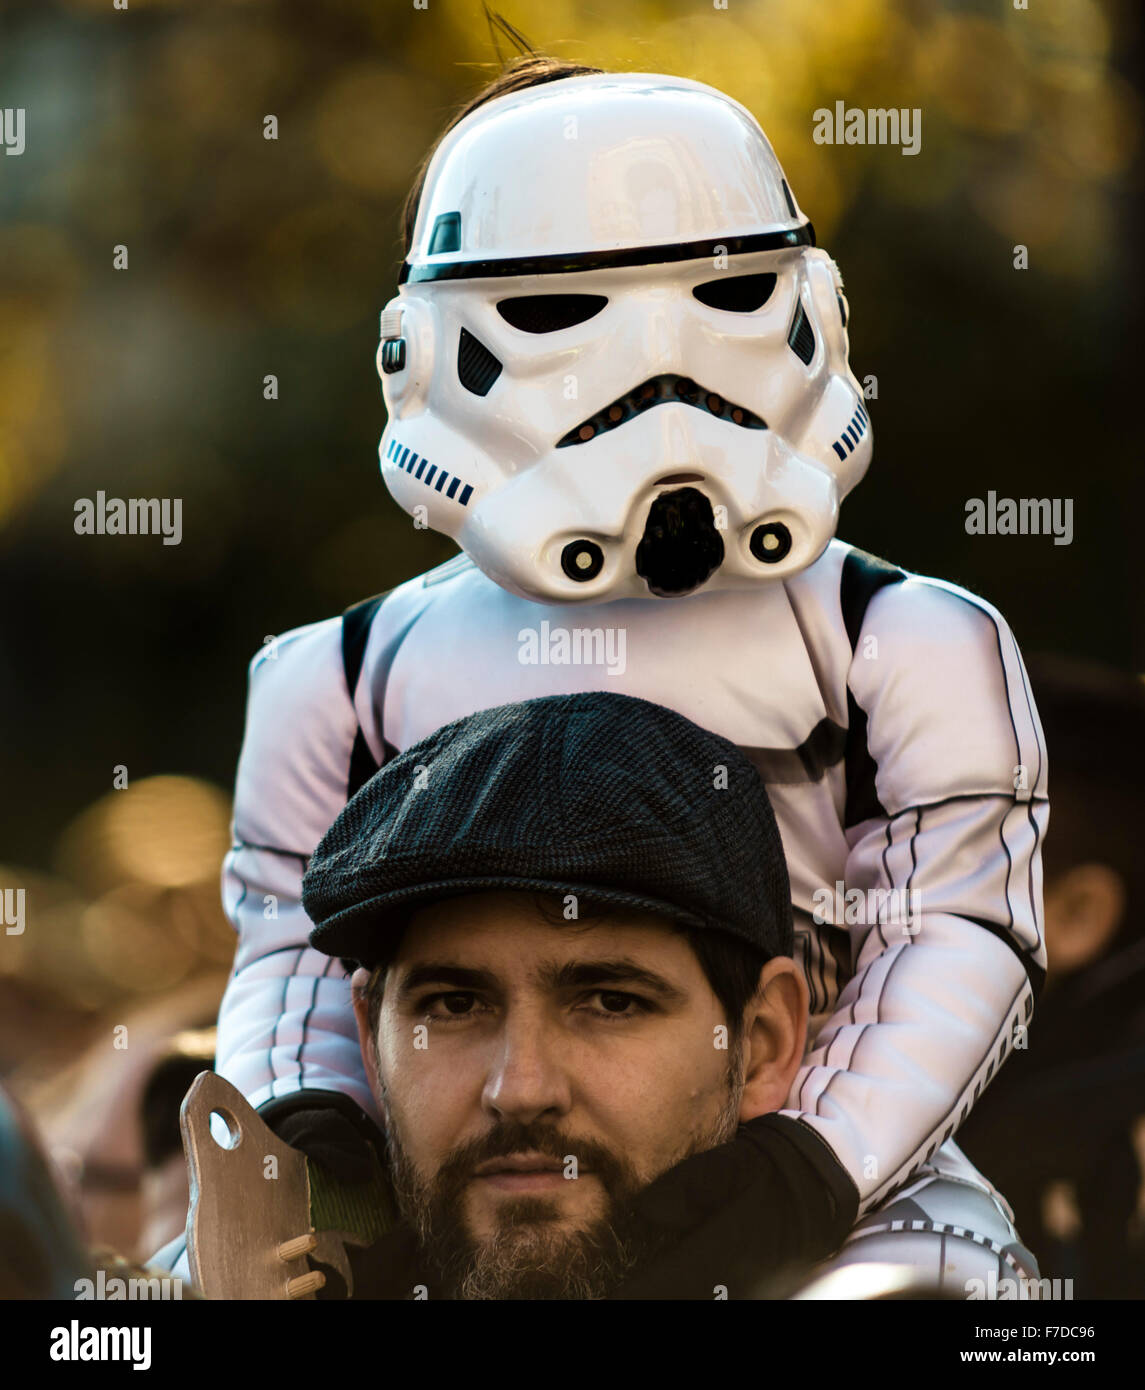 Barcelona, Spain. 29th November, 2015. A boy taking part in the 9th Star Wars parade in front of Barcelona's Arc de Triomf on the shoulders of his father is dressed up as the 'Stromtrooper' movie characters Credit:  matthi/Alamy Live News Stock Photo